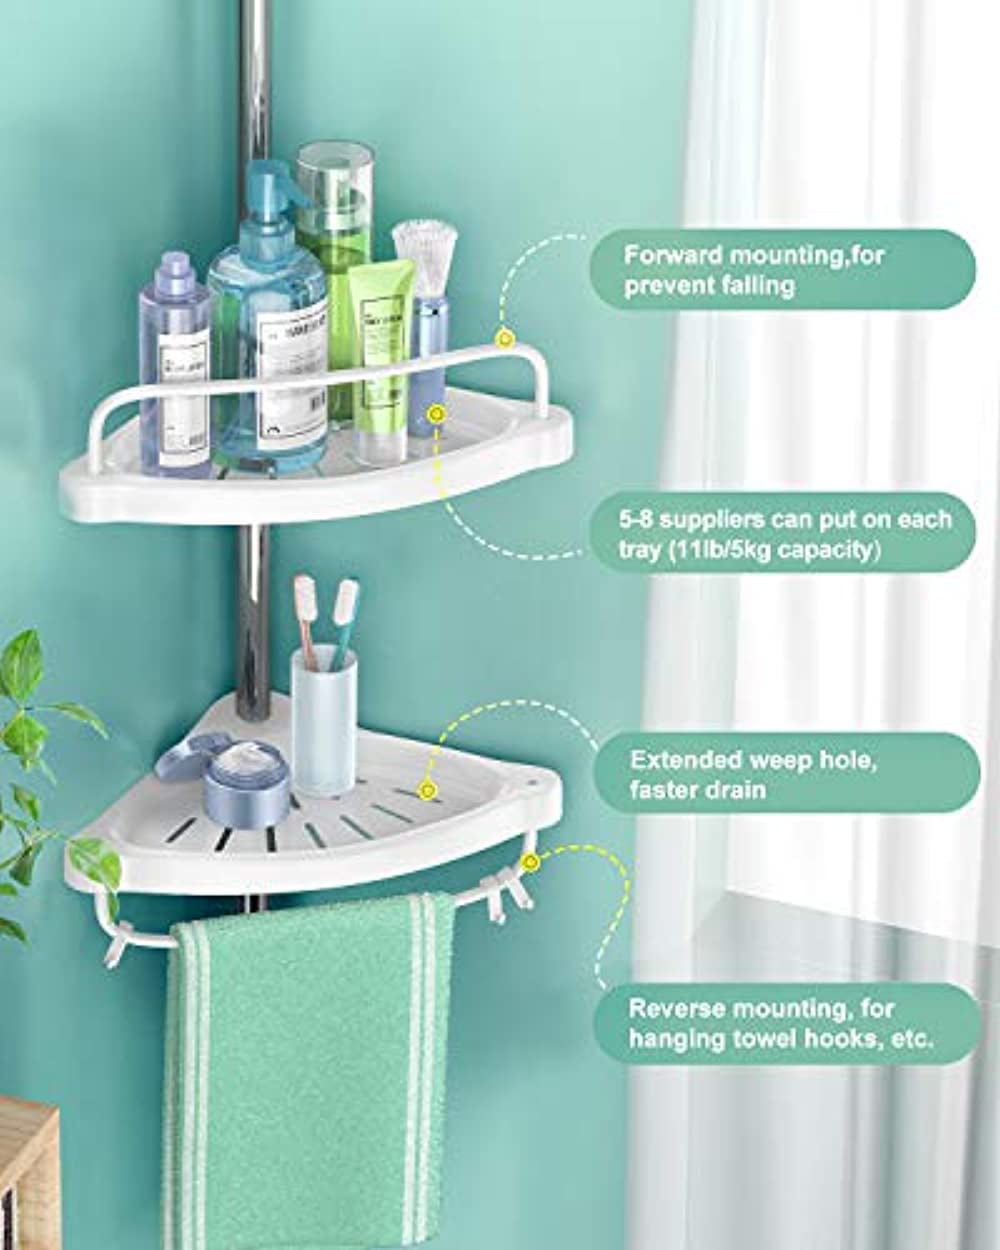  ADOVEL Shower Caddy Hanging, 2 in 1 Shower Caddy Over Shower  Head/Door, Sturdy Bathroom Shelf Organizer with Adjustable Height, No Rust,  No Drilling, 4 Suction Cups for Bathroom Storage (Black) 